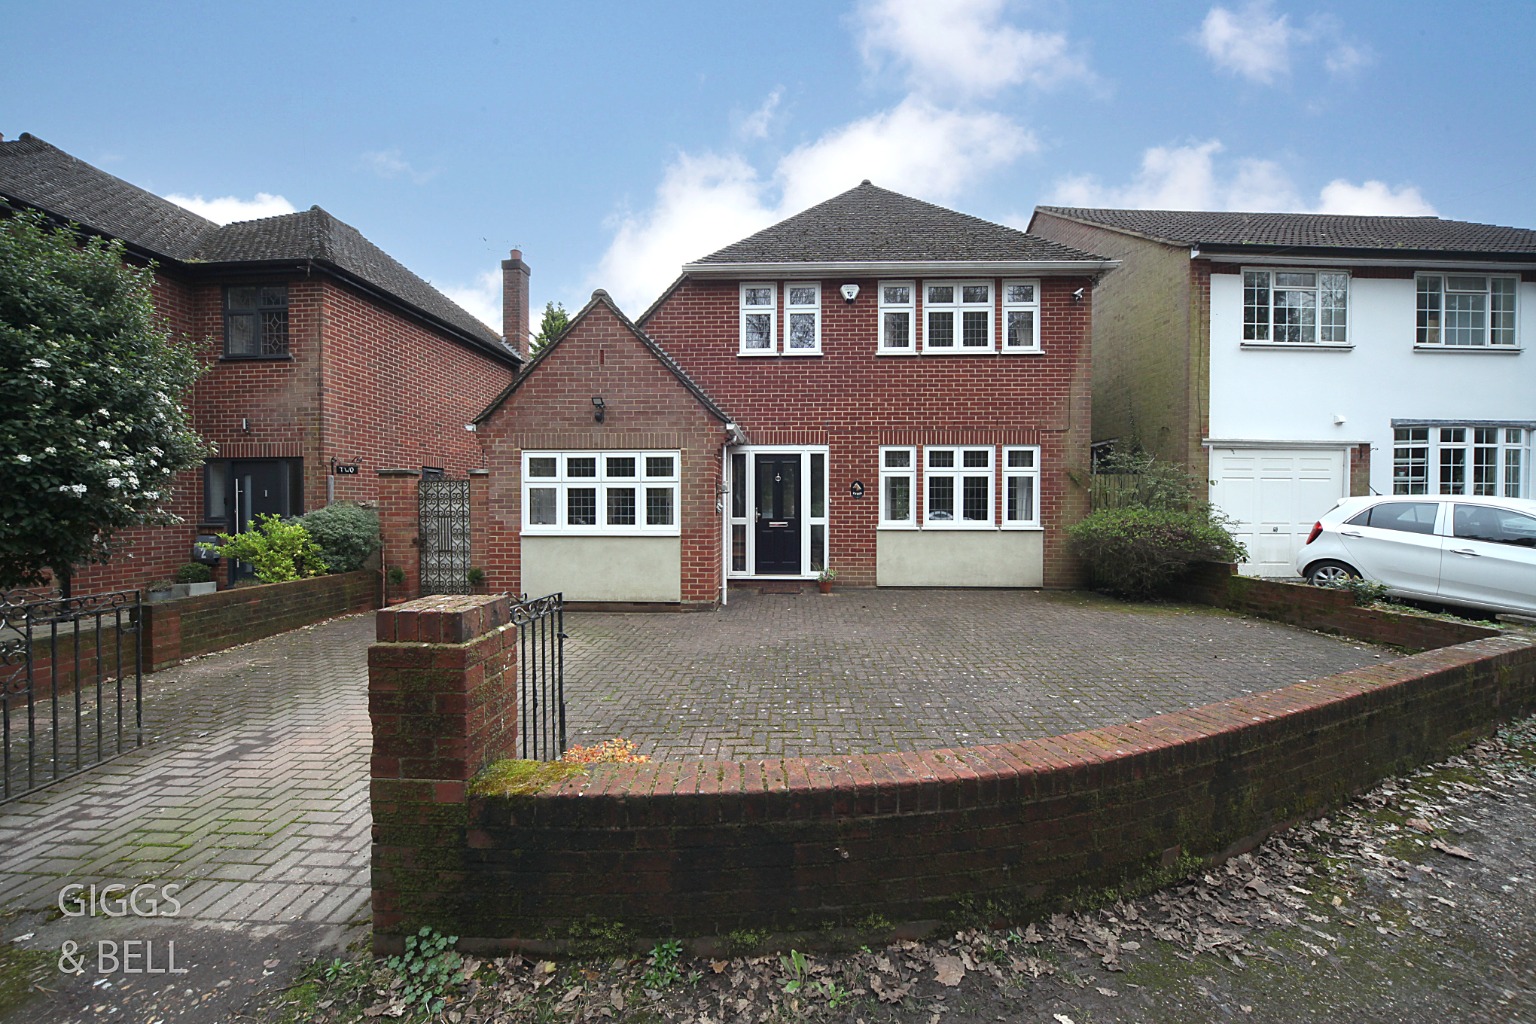 3 bed detached house for sale in London Road, Luton - Property Image 1